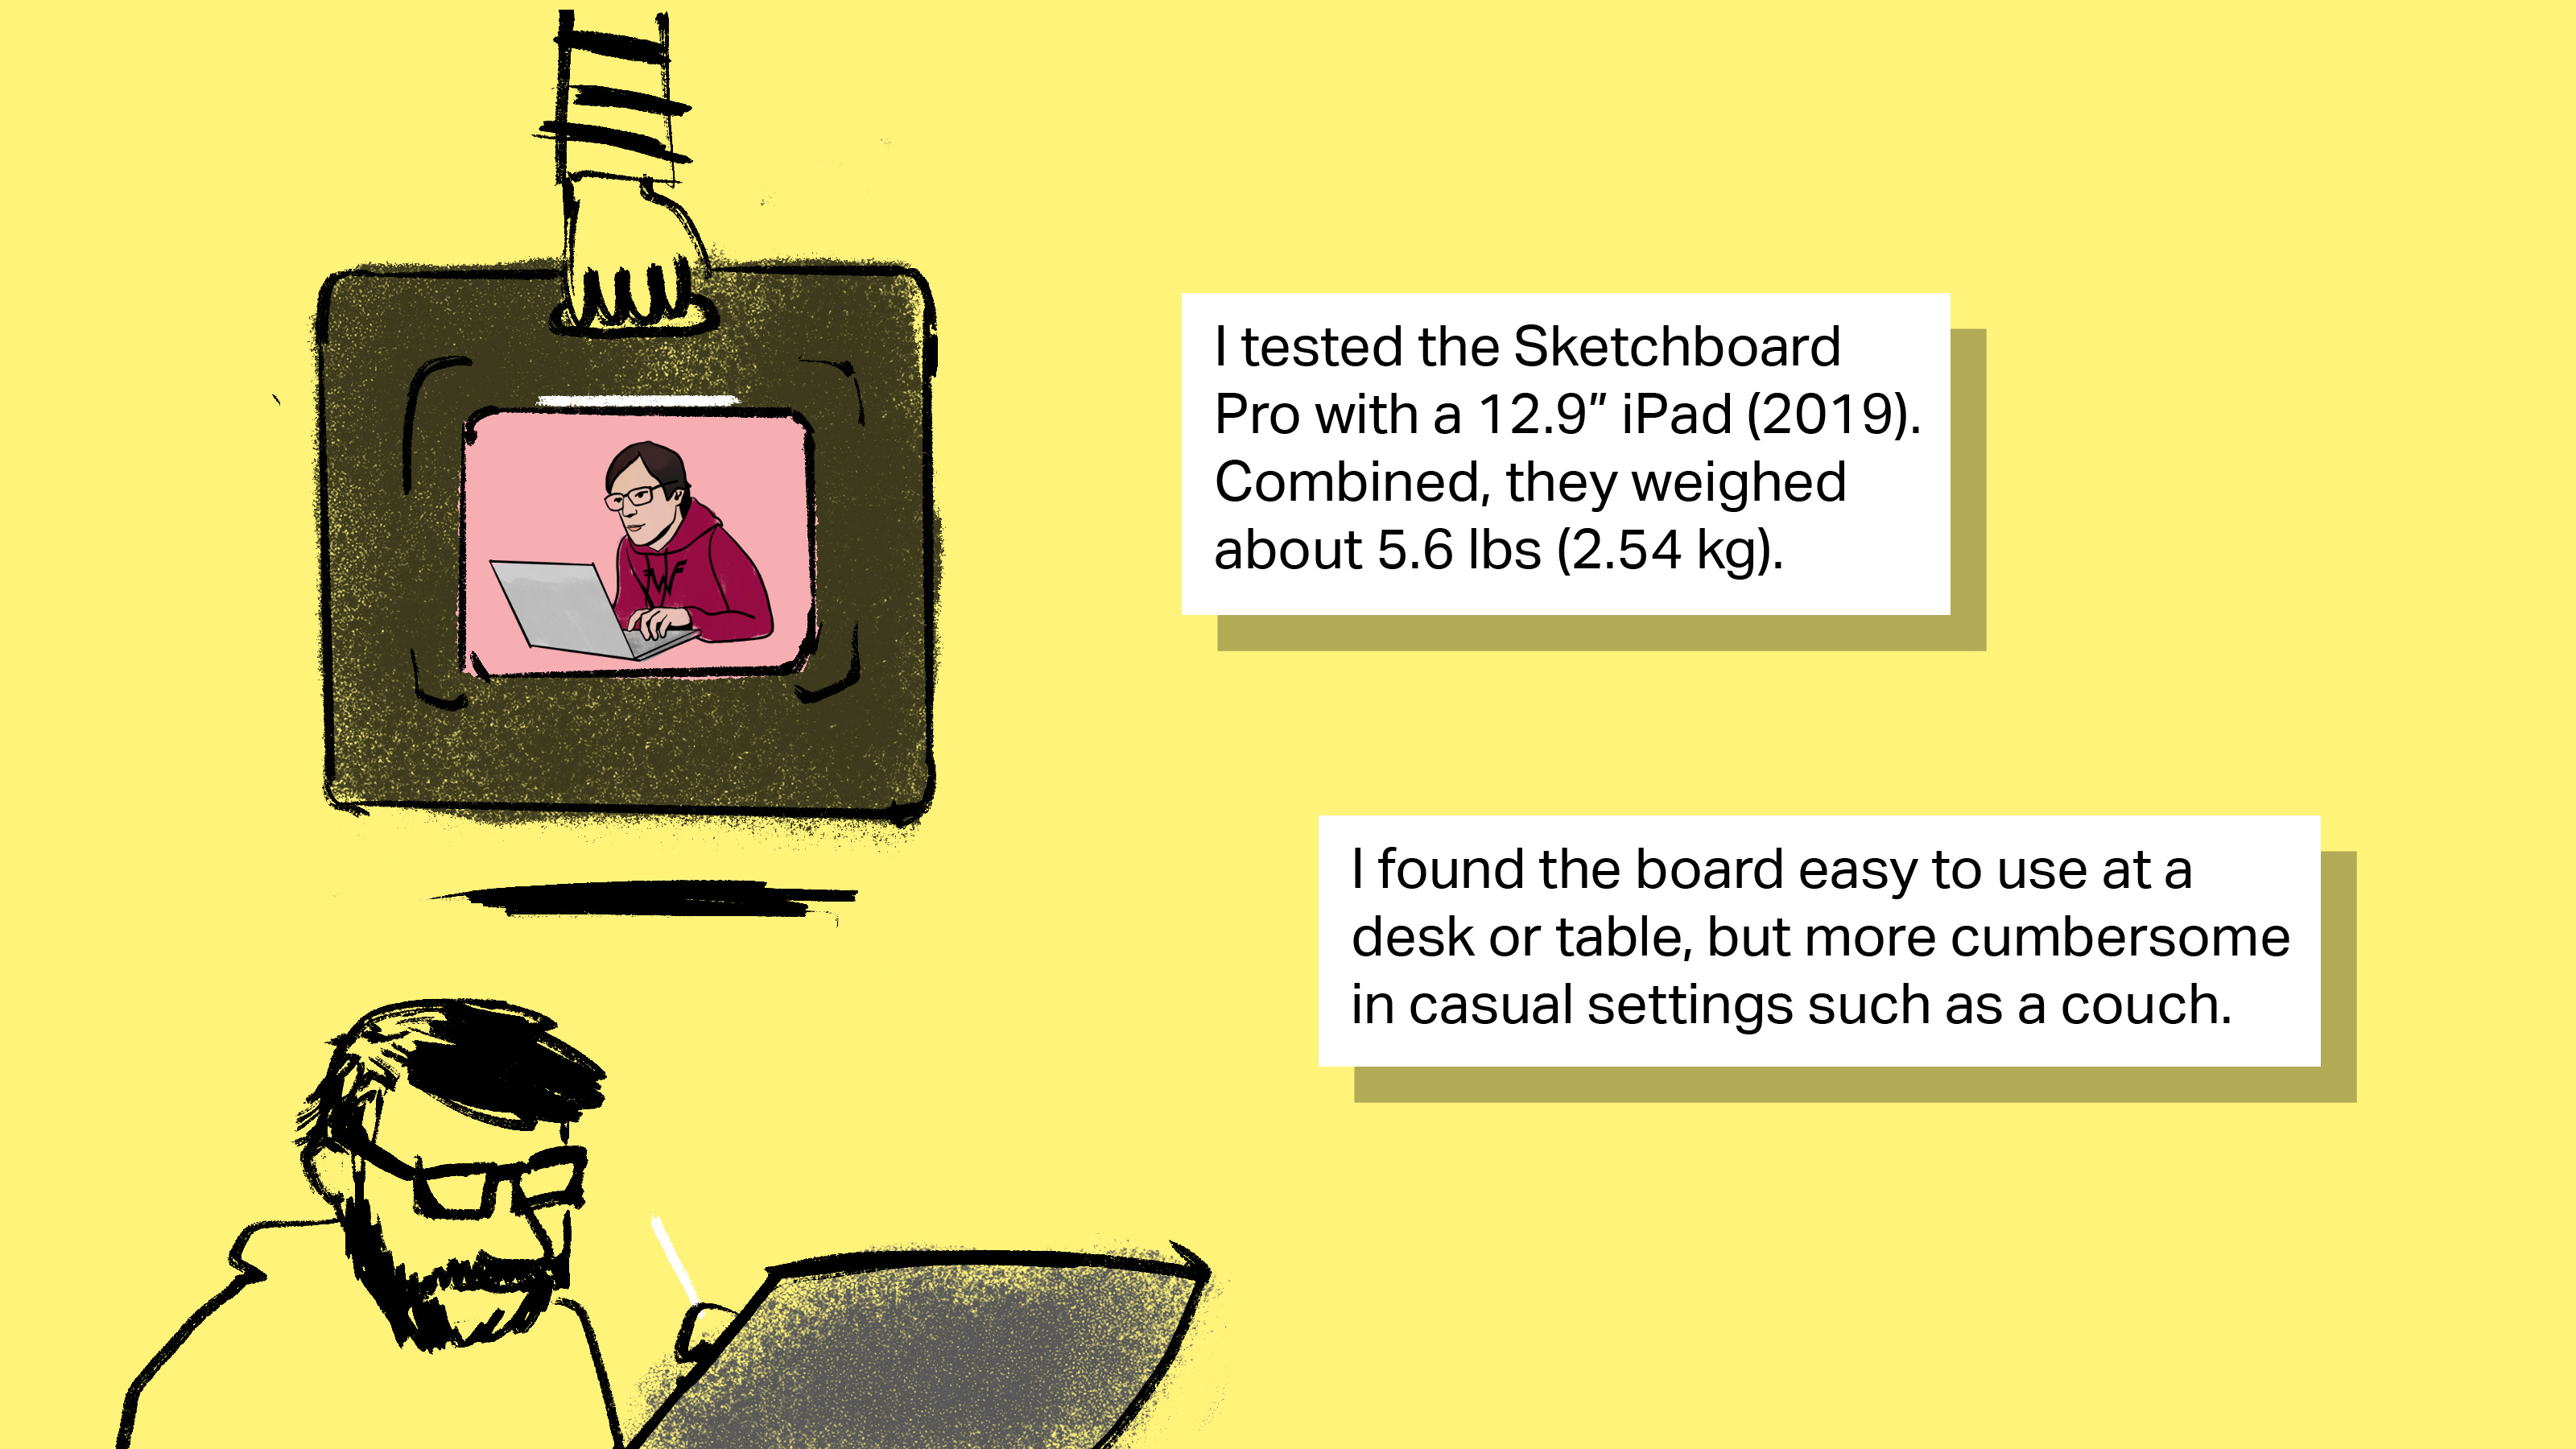 [text] I tested the Sketchboard Pro with a 12.9” iPad (2019). Combined, they weighed about 5.6 lbs (2.54 kg). I found the board easy to use at a desk or table, but more cumbersome in casual settings such as a couch. [image: illustrations of holding the Sketchboard Pro by the handle and sitting and drawing]